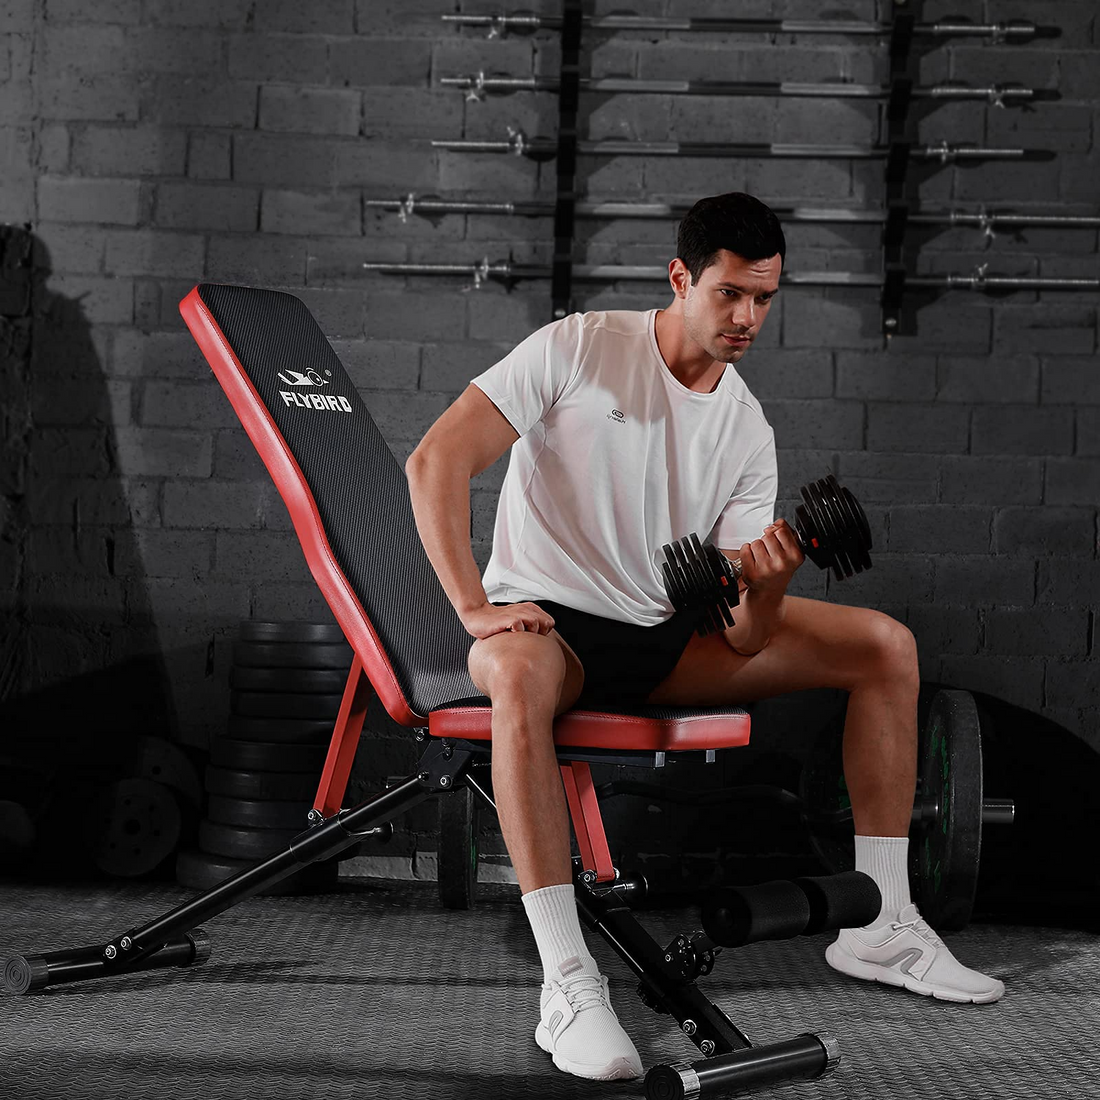 man weight training with adjustable bench